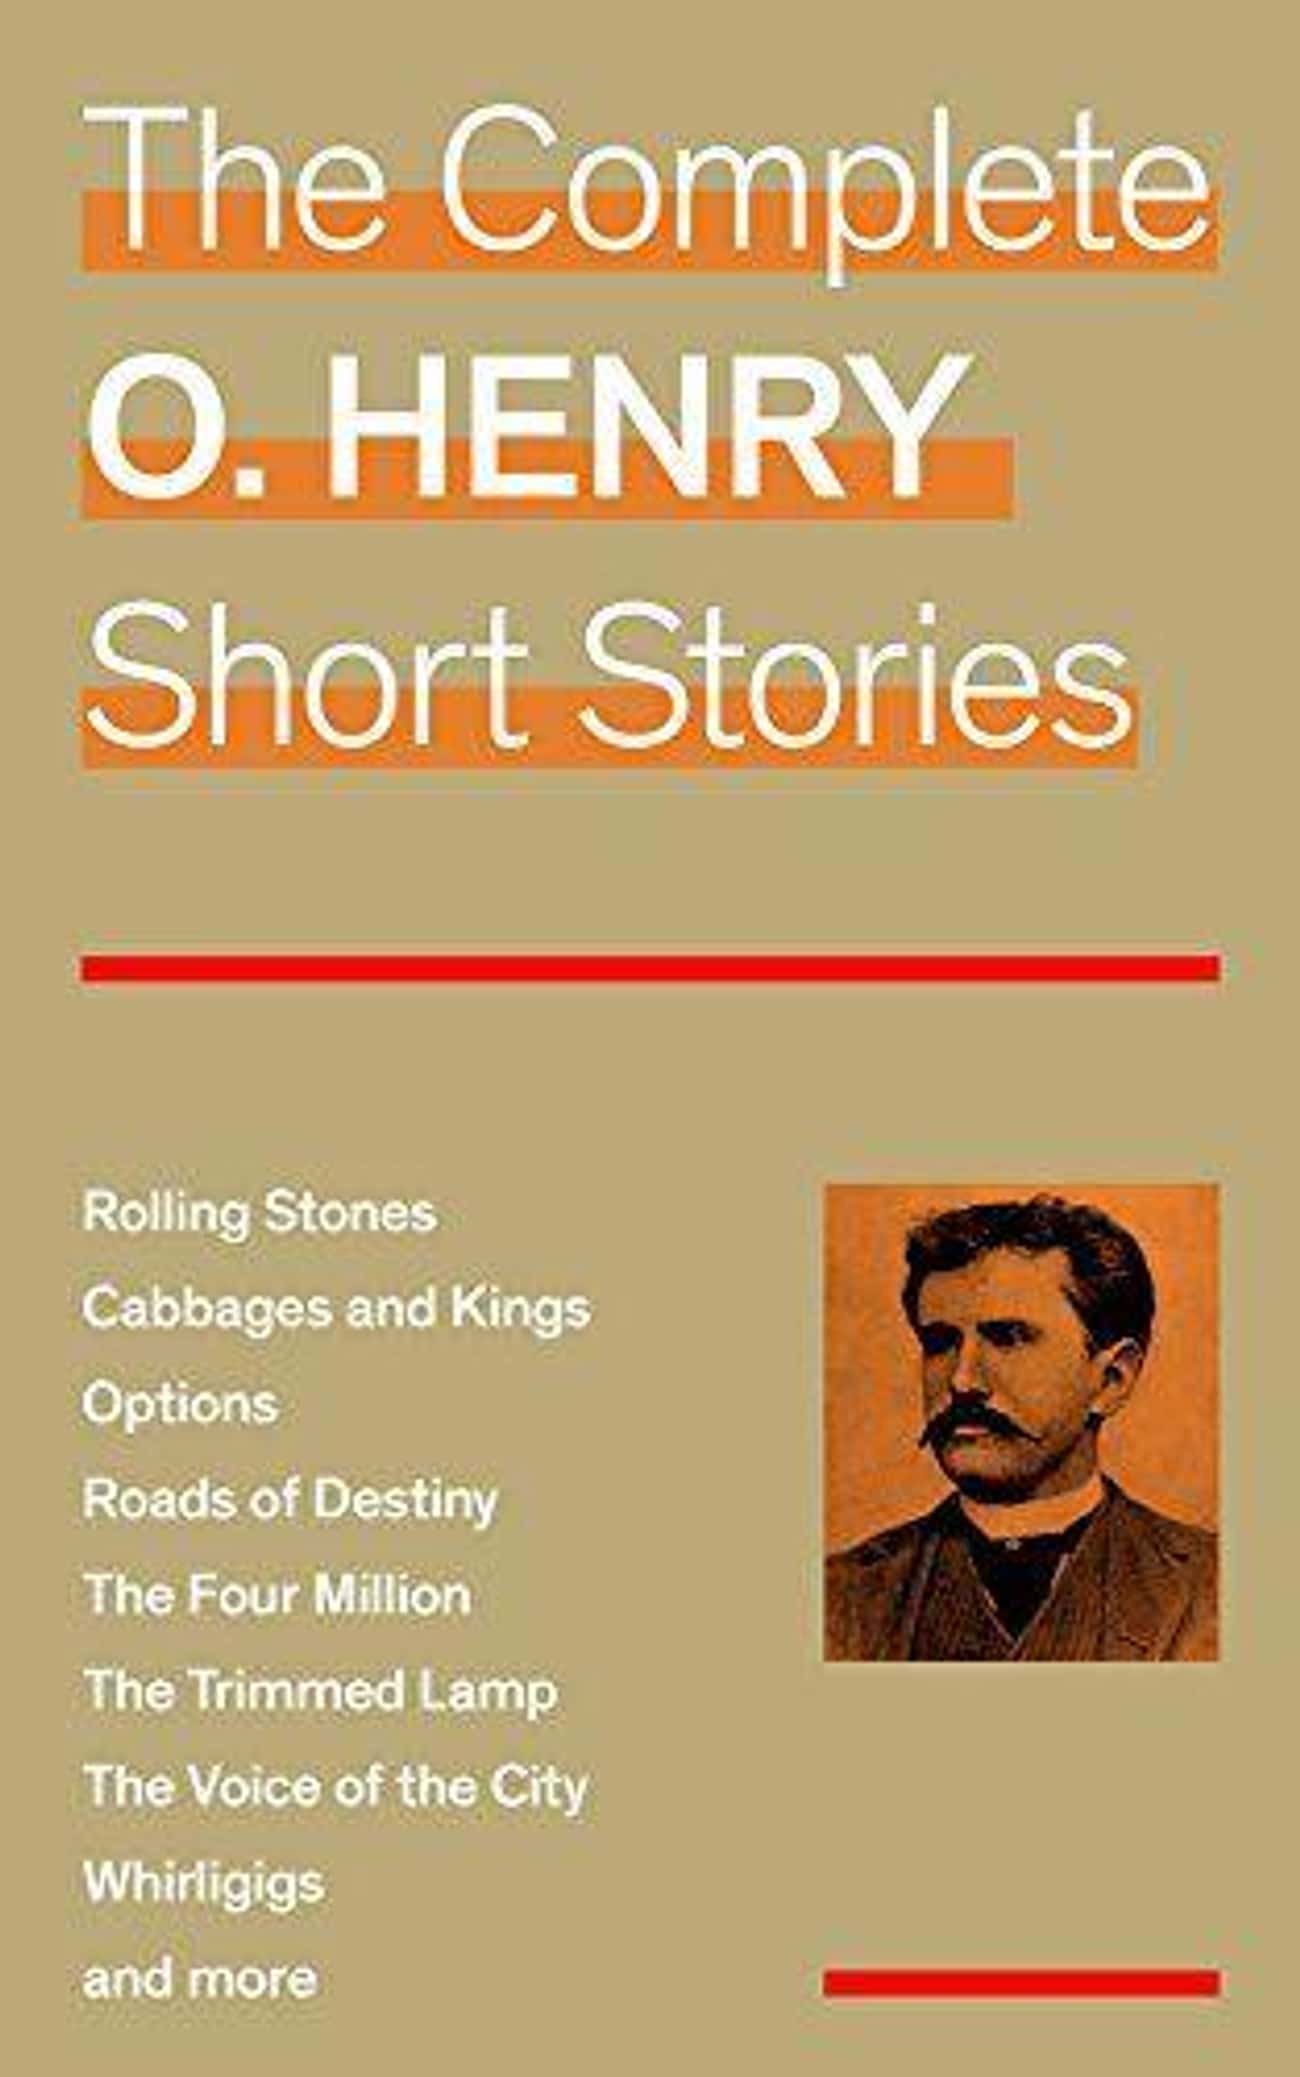 Banana Republic: The Colloquial Term Defining An Unstable Country Overly Dependent On A Single Resource Comes From O. Henry’s 1904 Short Story Collection